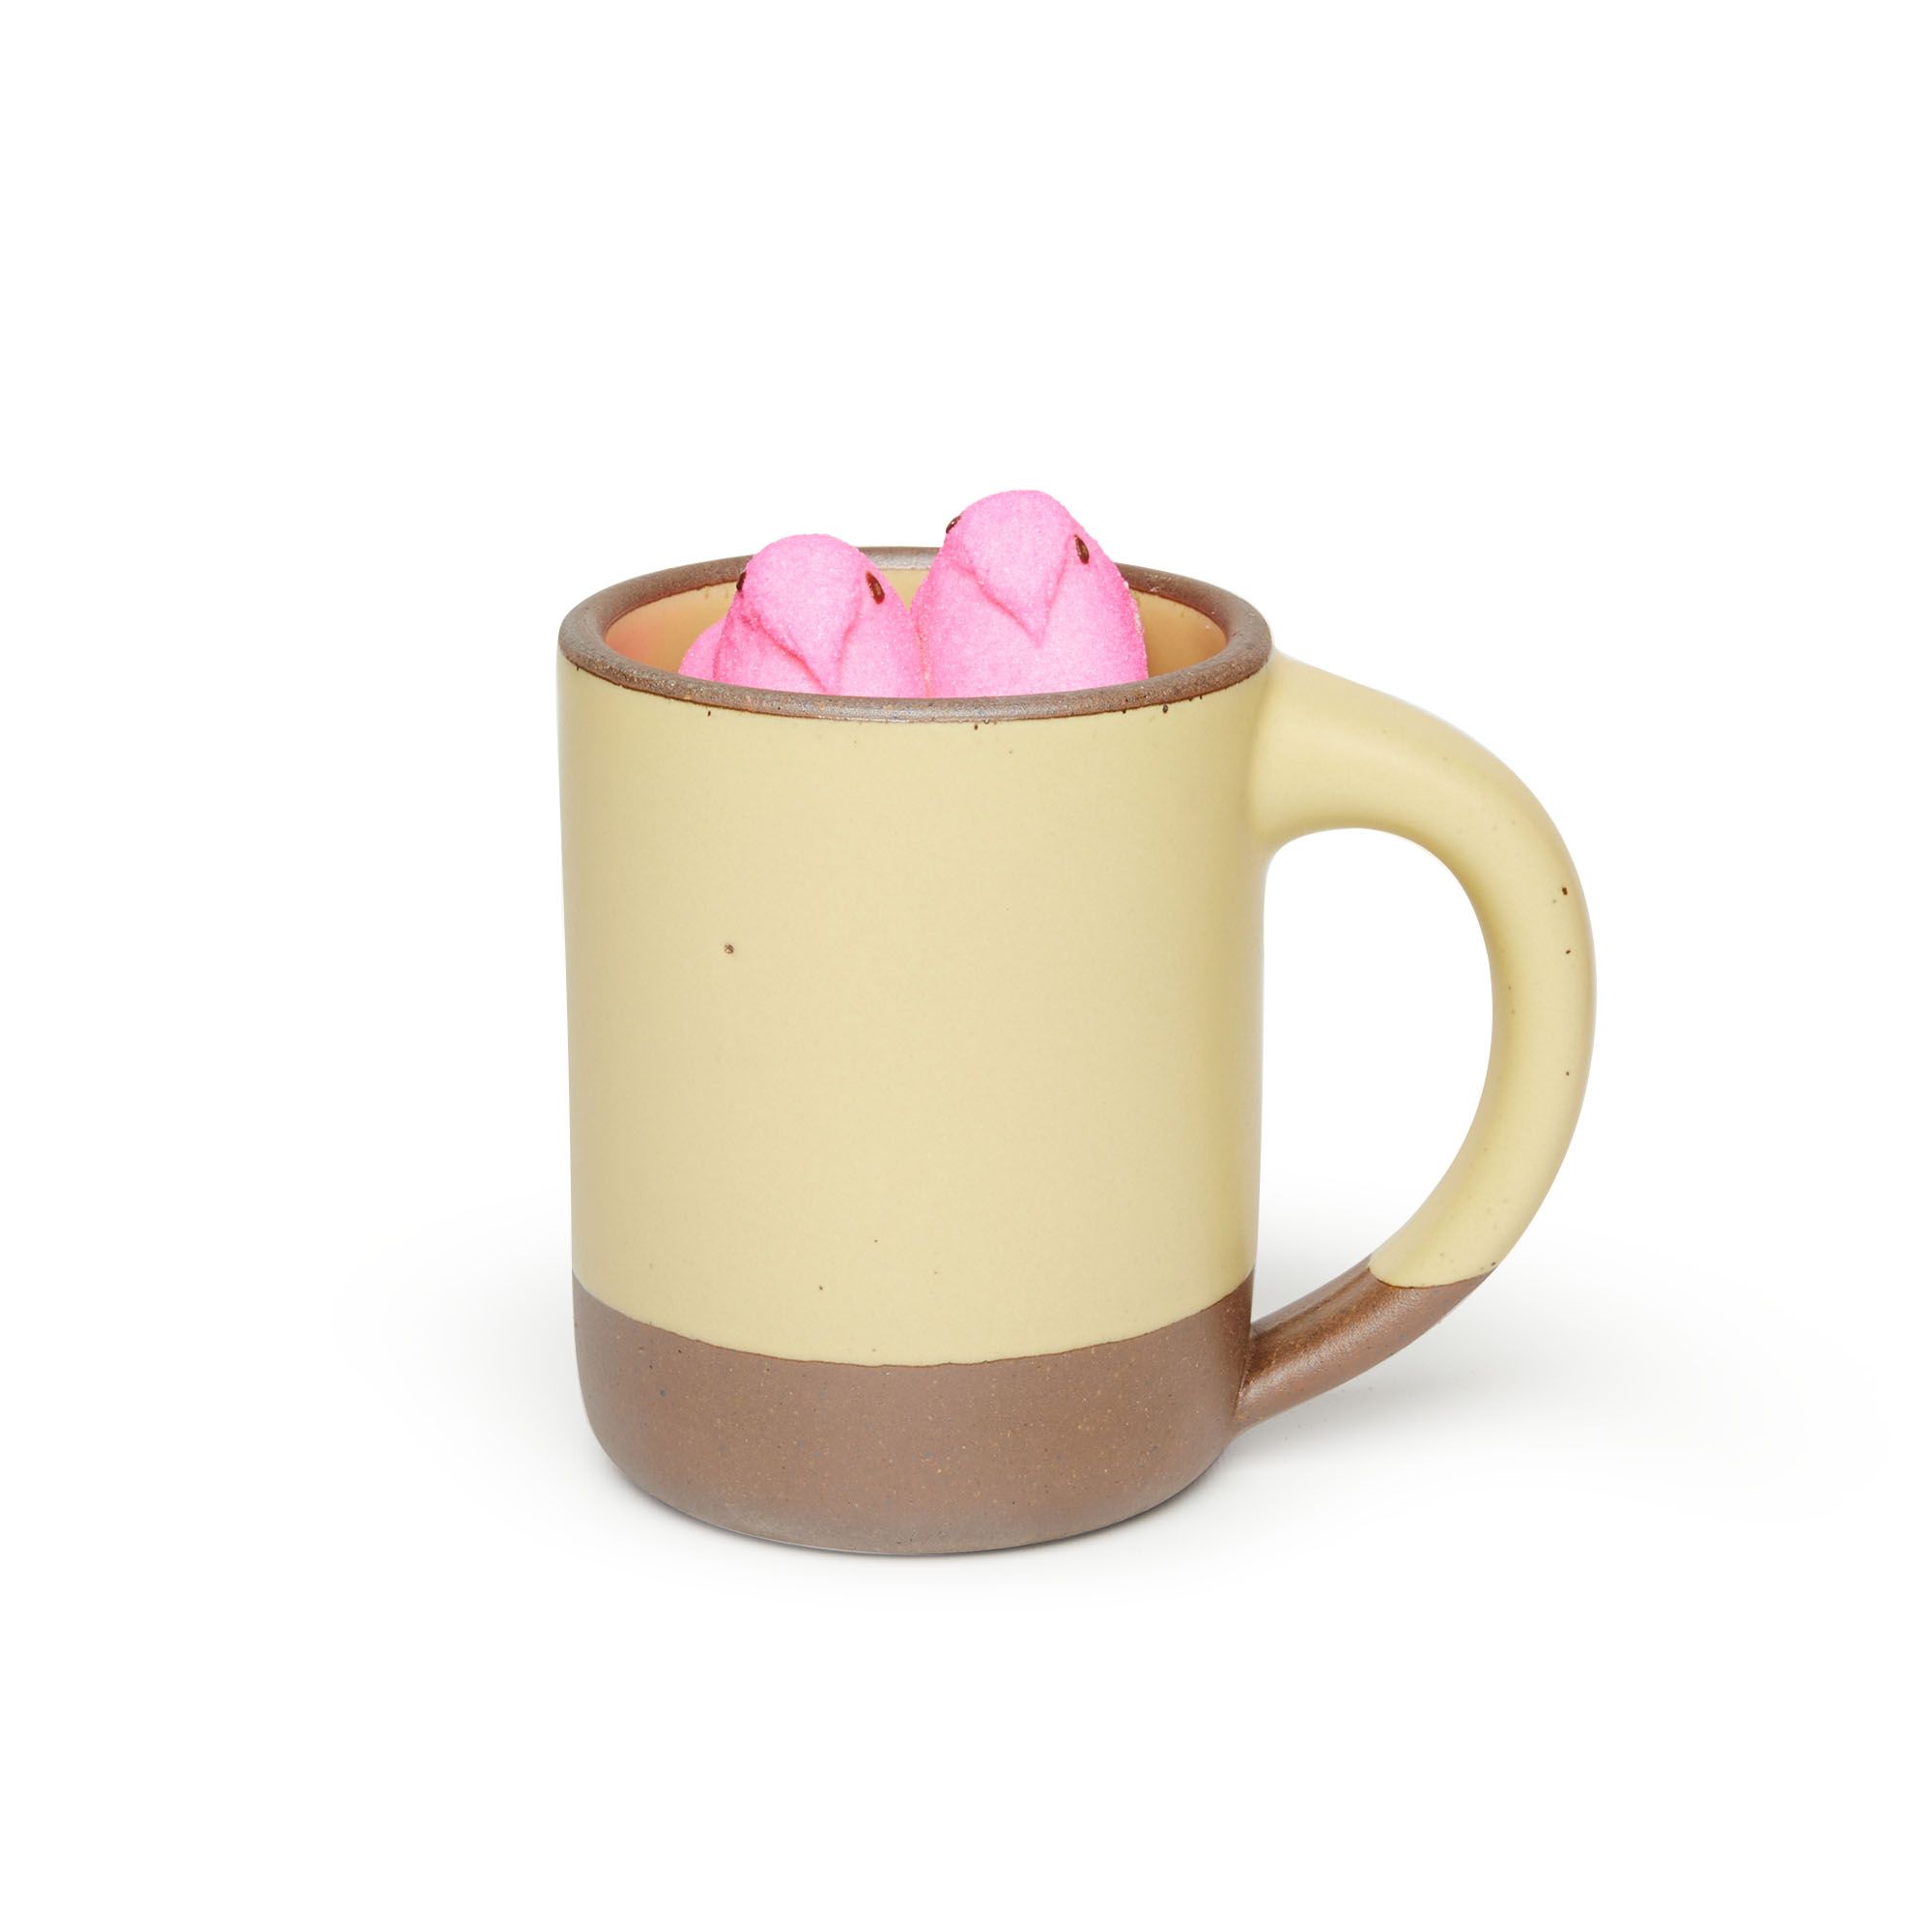 A big sized ceramic mug with handle in a light butter yellow glaze featuring iron speckles and unglazed rim and bottom base, with 2 pink candy peeps inside